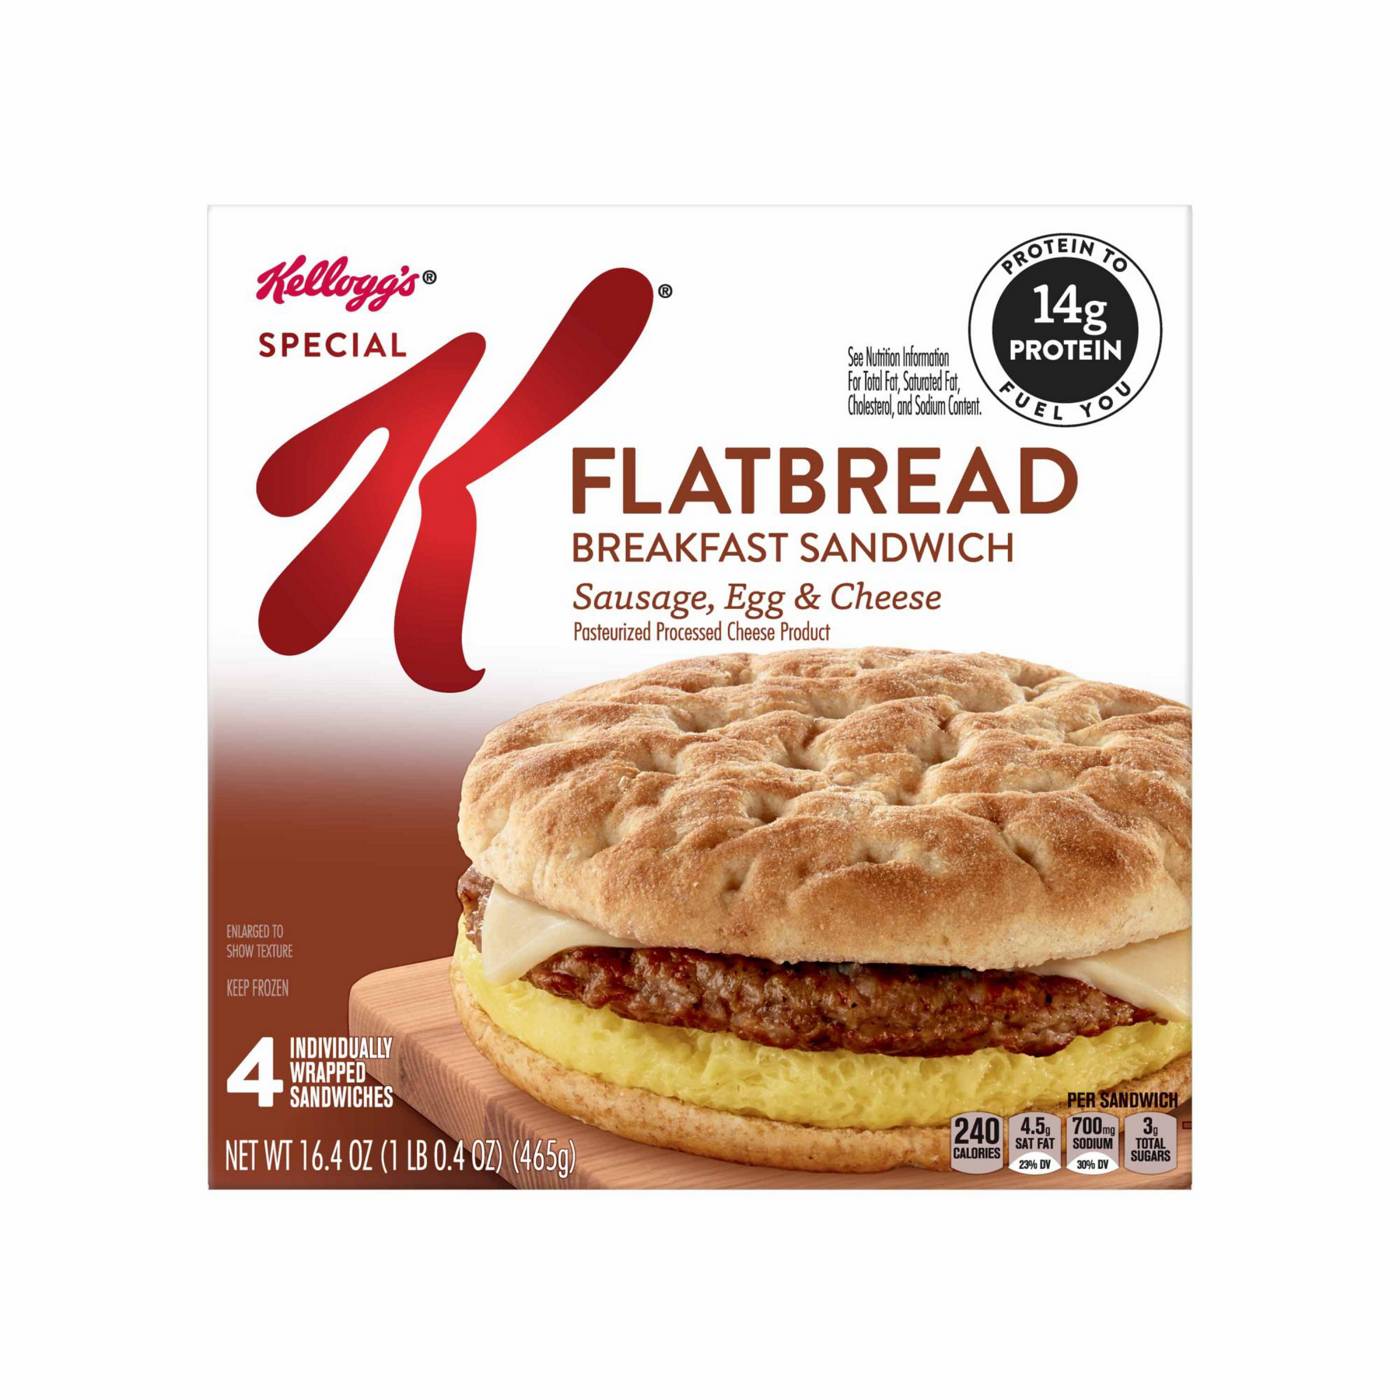 Kellogg's Special K Flatbread Breakfast Sandwiches Sausage, Egg, and Cheese; image 4 of 6